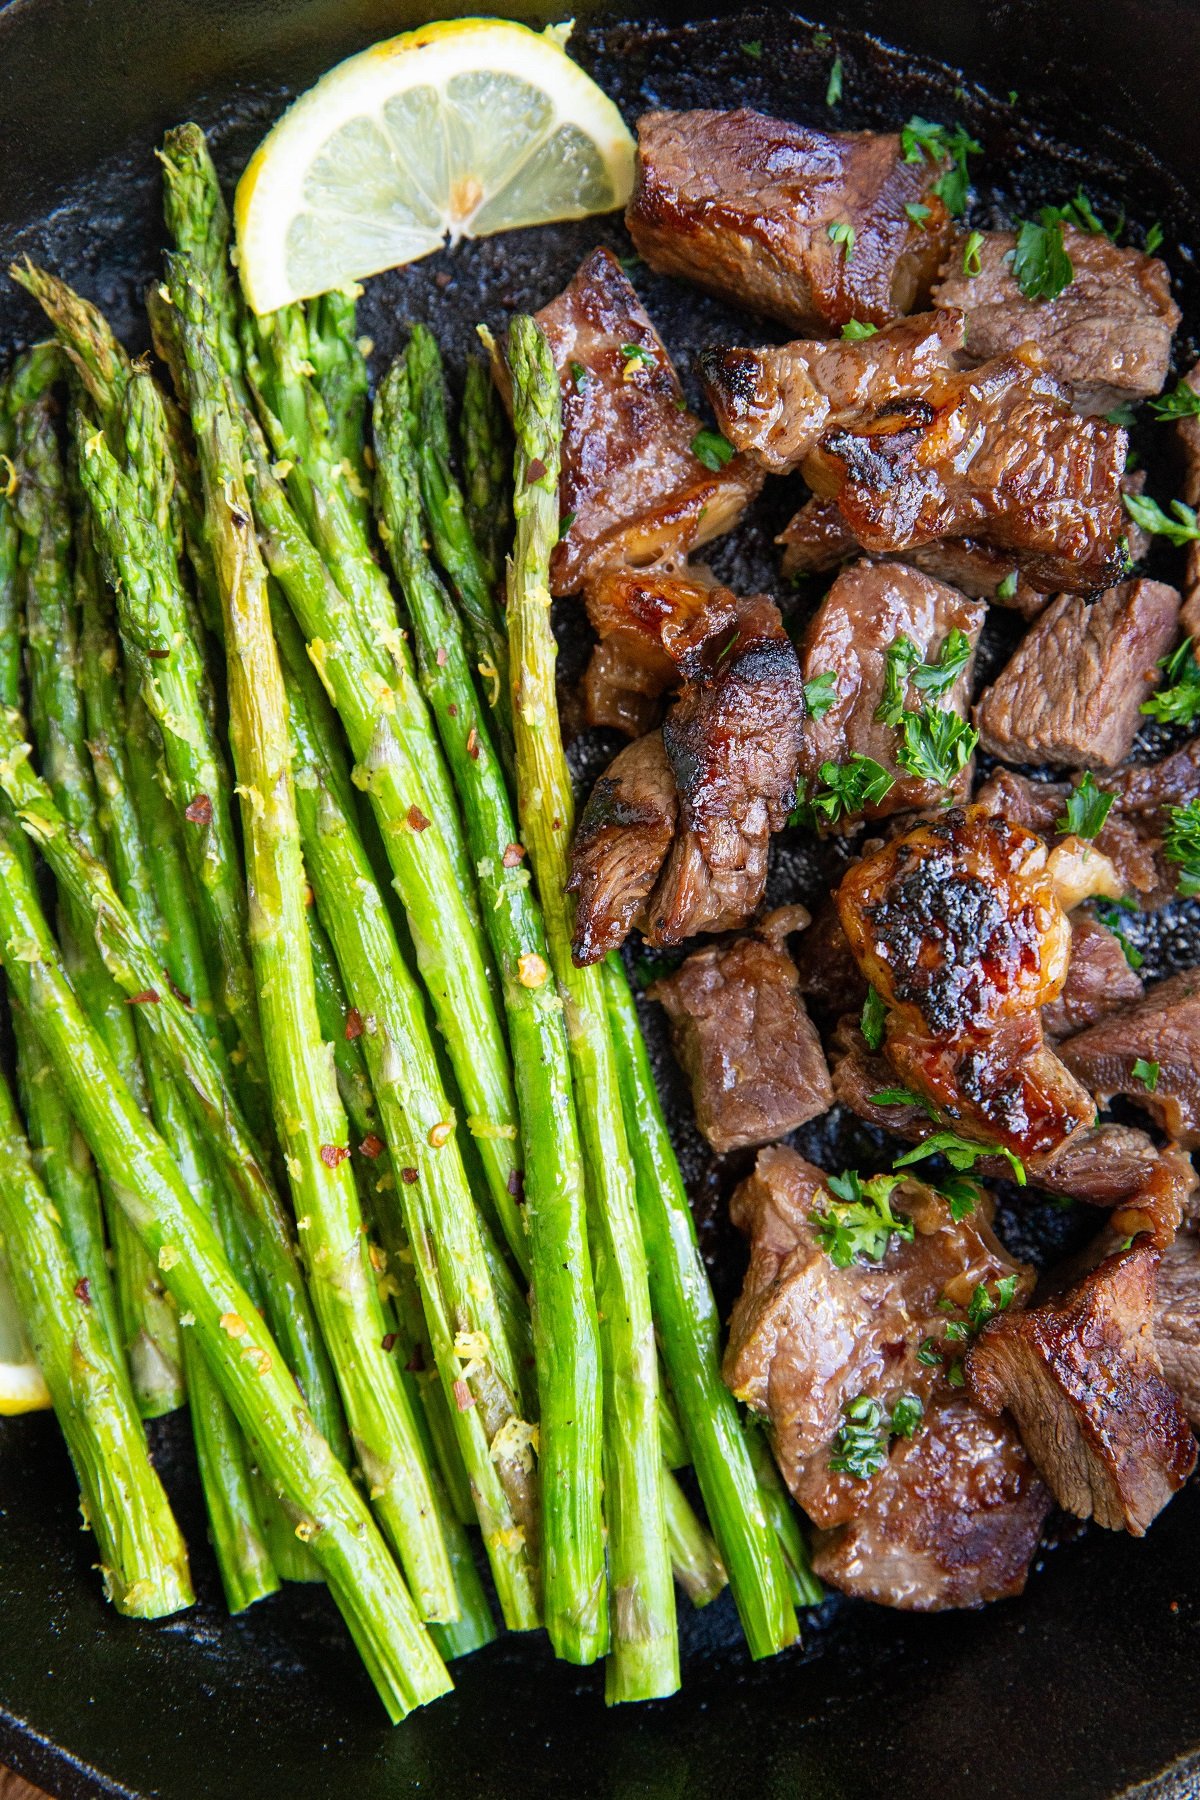 Cast iron skillet with steak bites and asparagus in it, ready to eat.